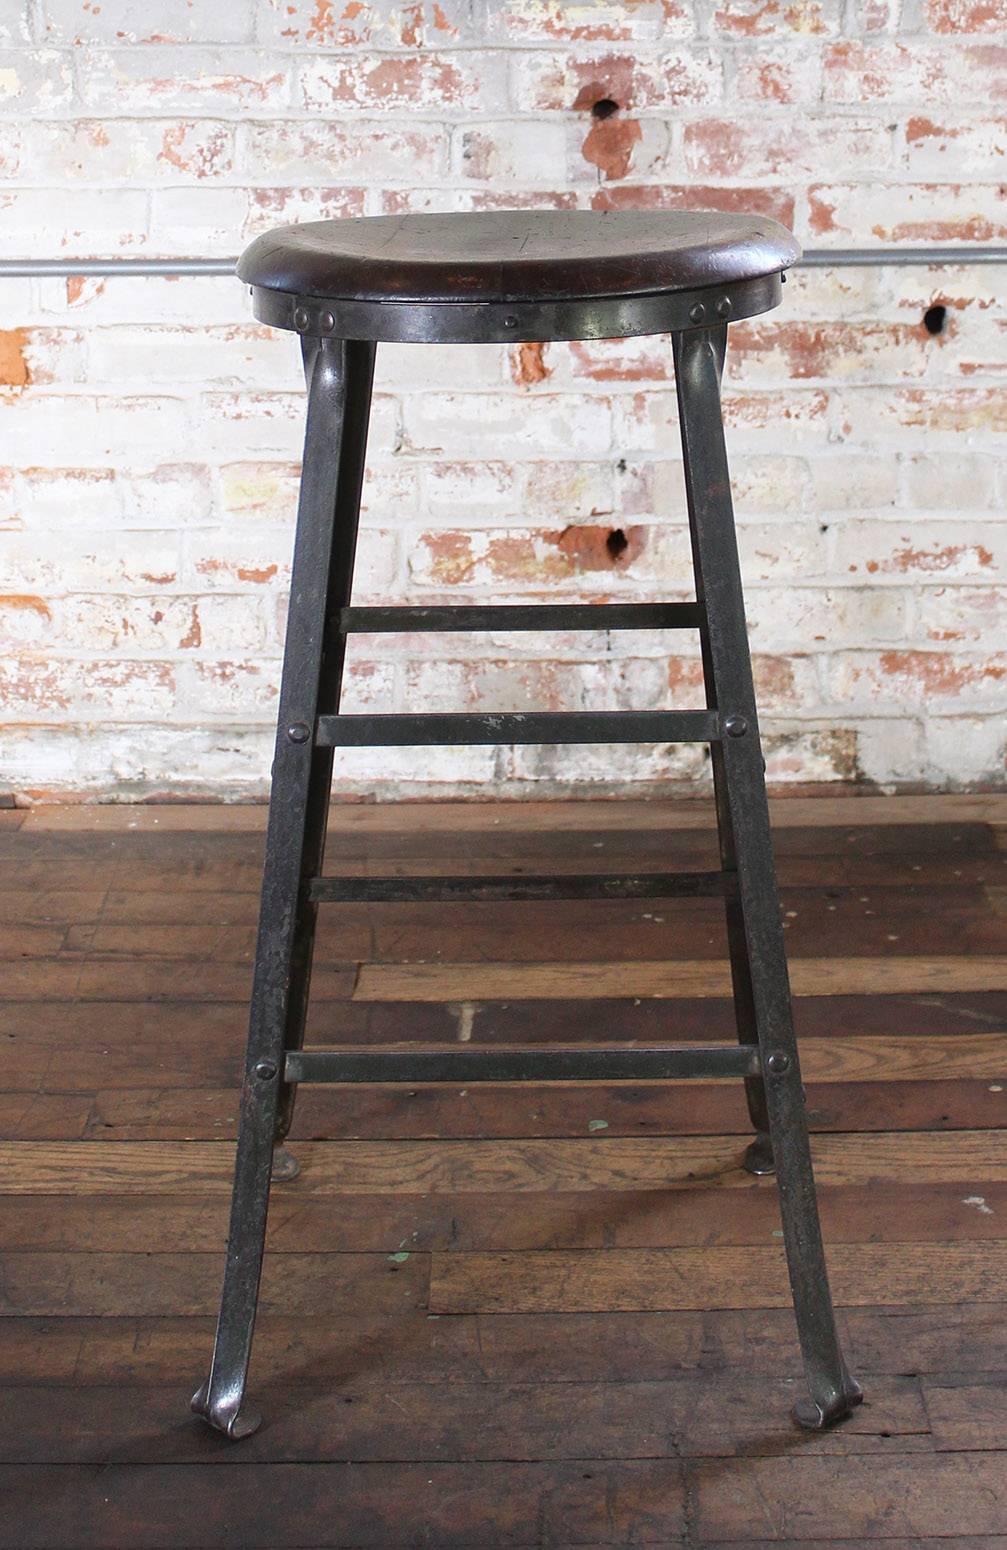 Rustic bar stool backless kitchen wood and metal bar stool. Great vintage patina. Solid wood seat measures 14" in diameter and is 7/8" thick. Seat height measures 27 3/4" and base measures 16" x 16". We have more available